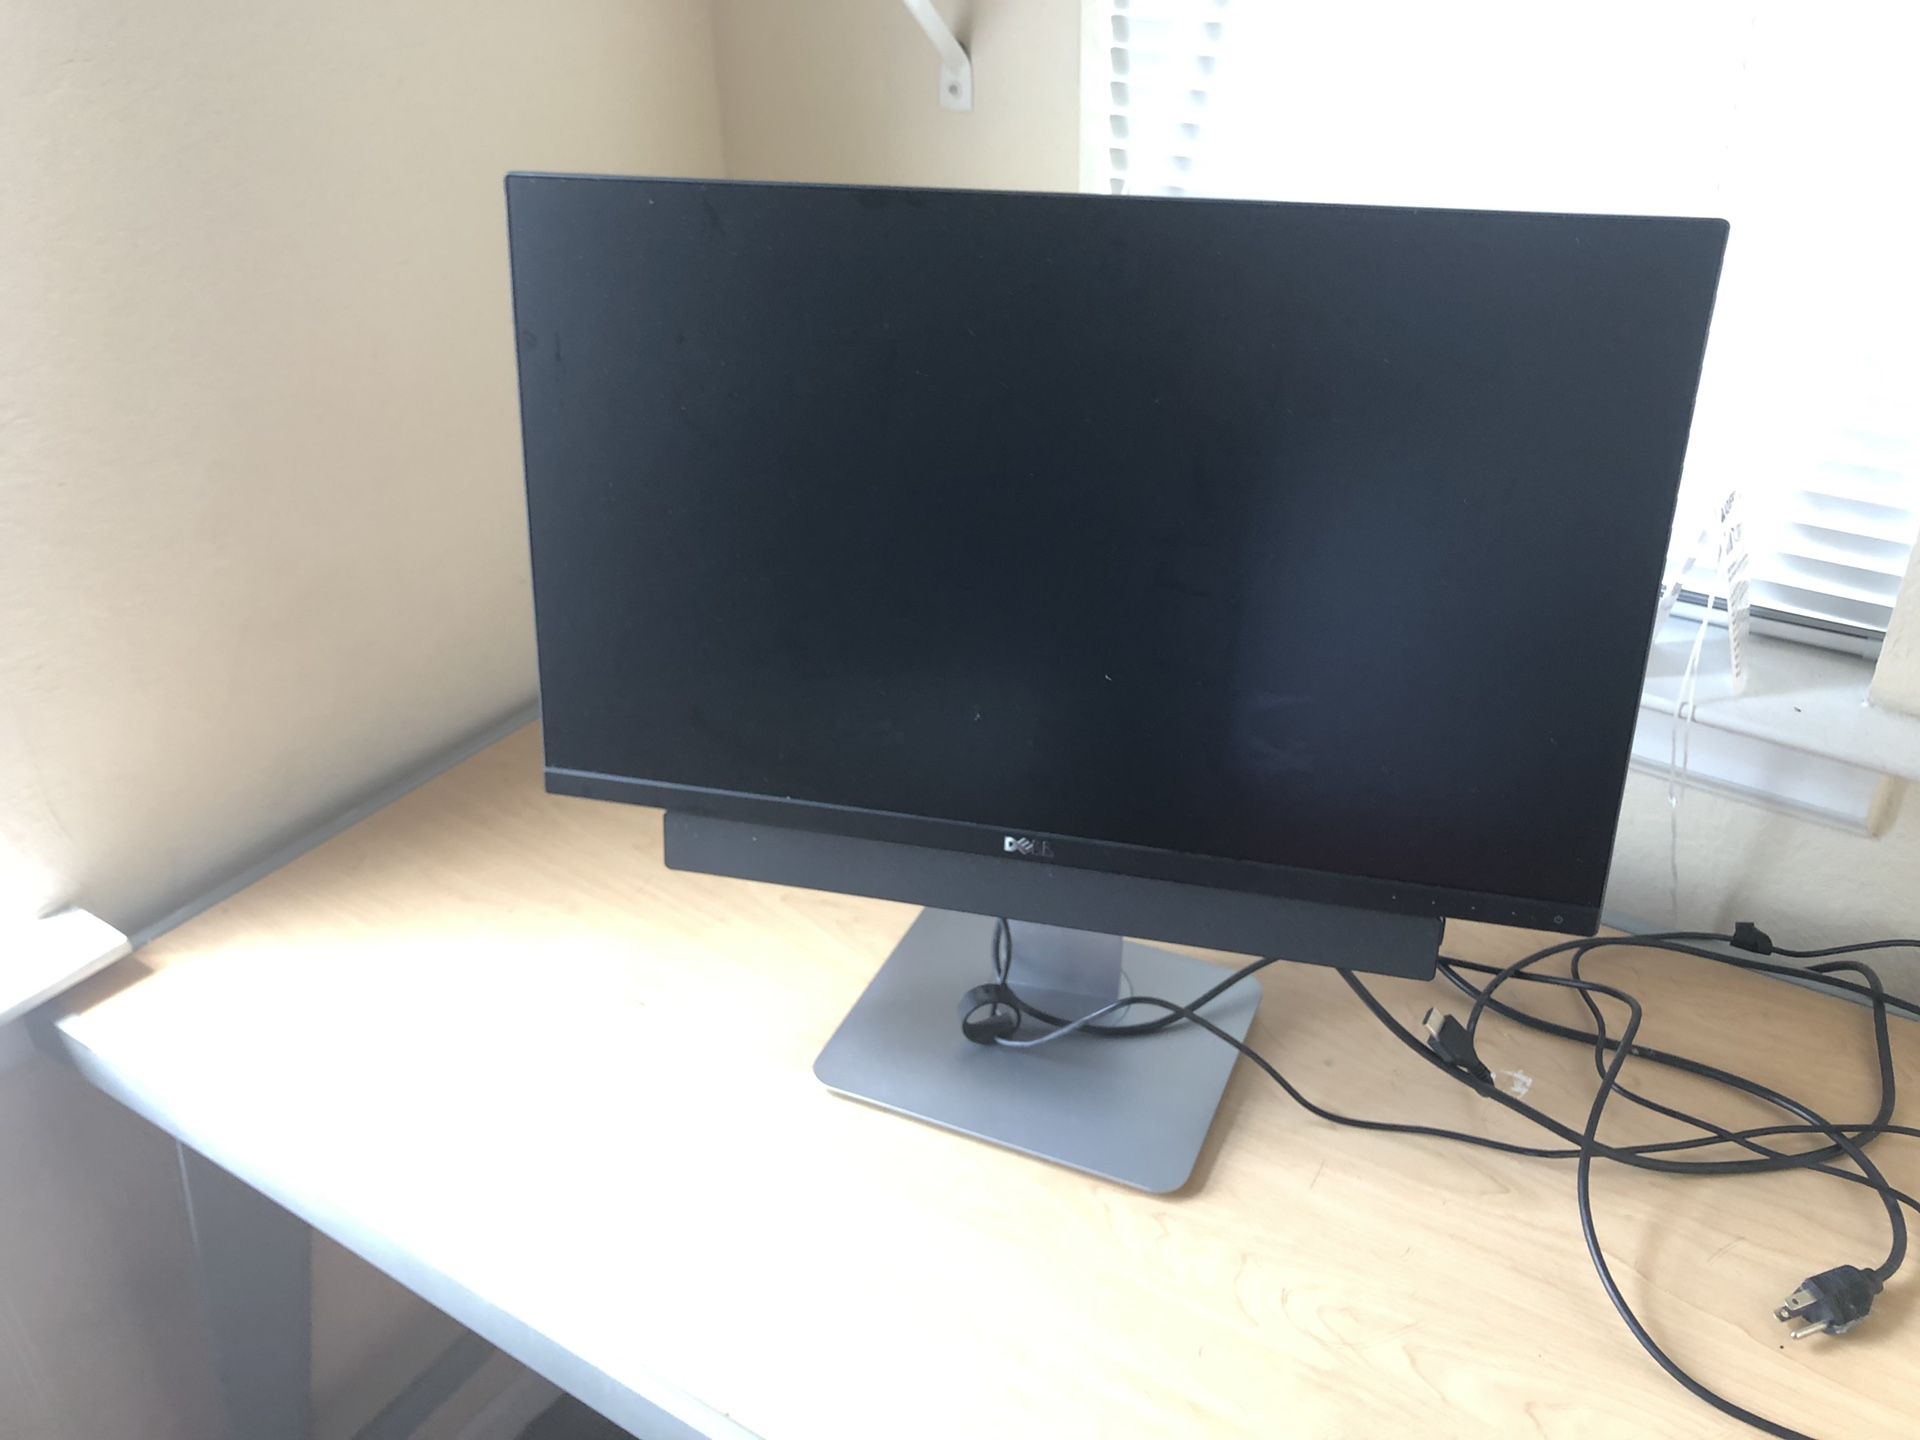 Dell LCD Monitor U2414Hb with sound bar